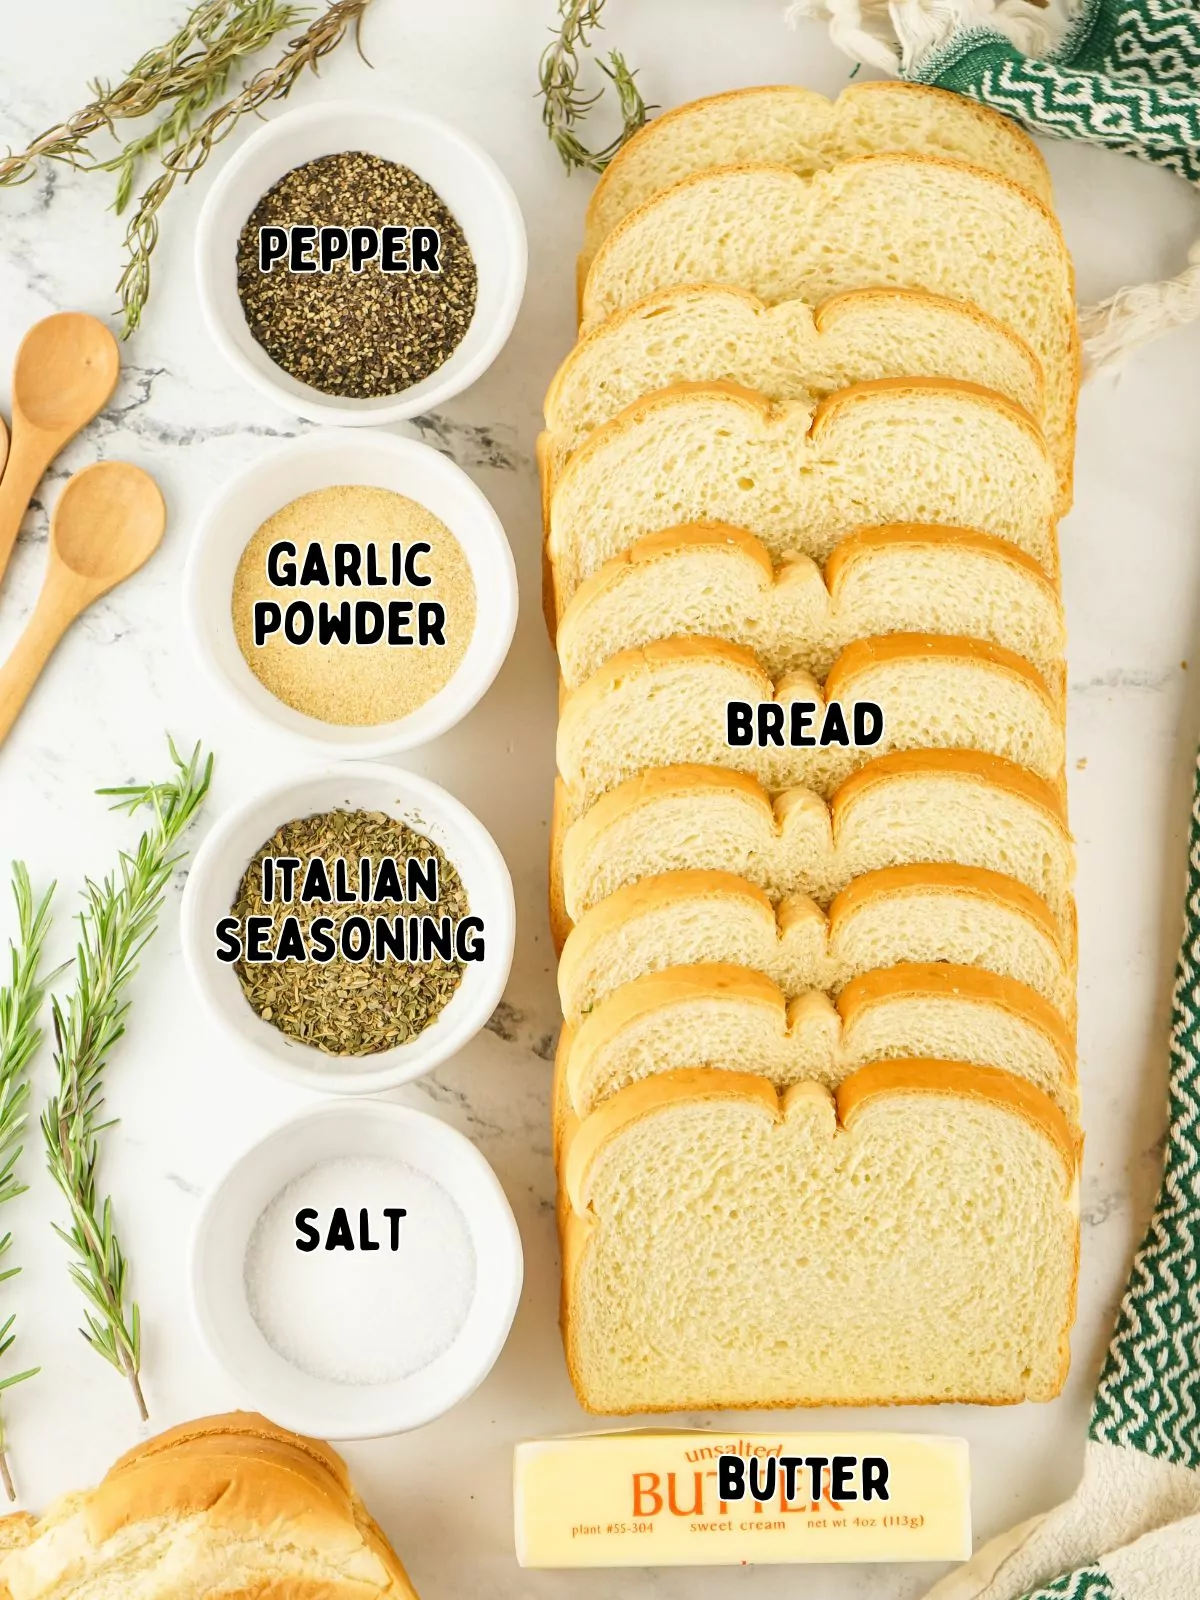 ingredients to make homemade croutons including bread, butter, and herbs.